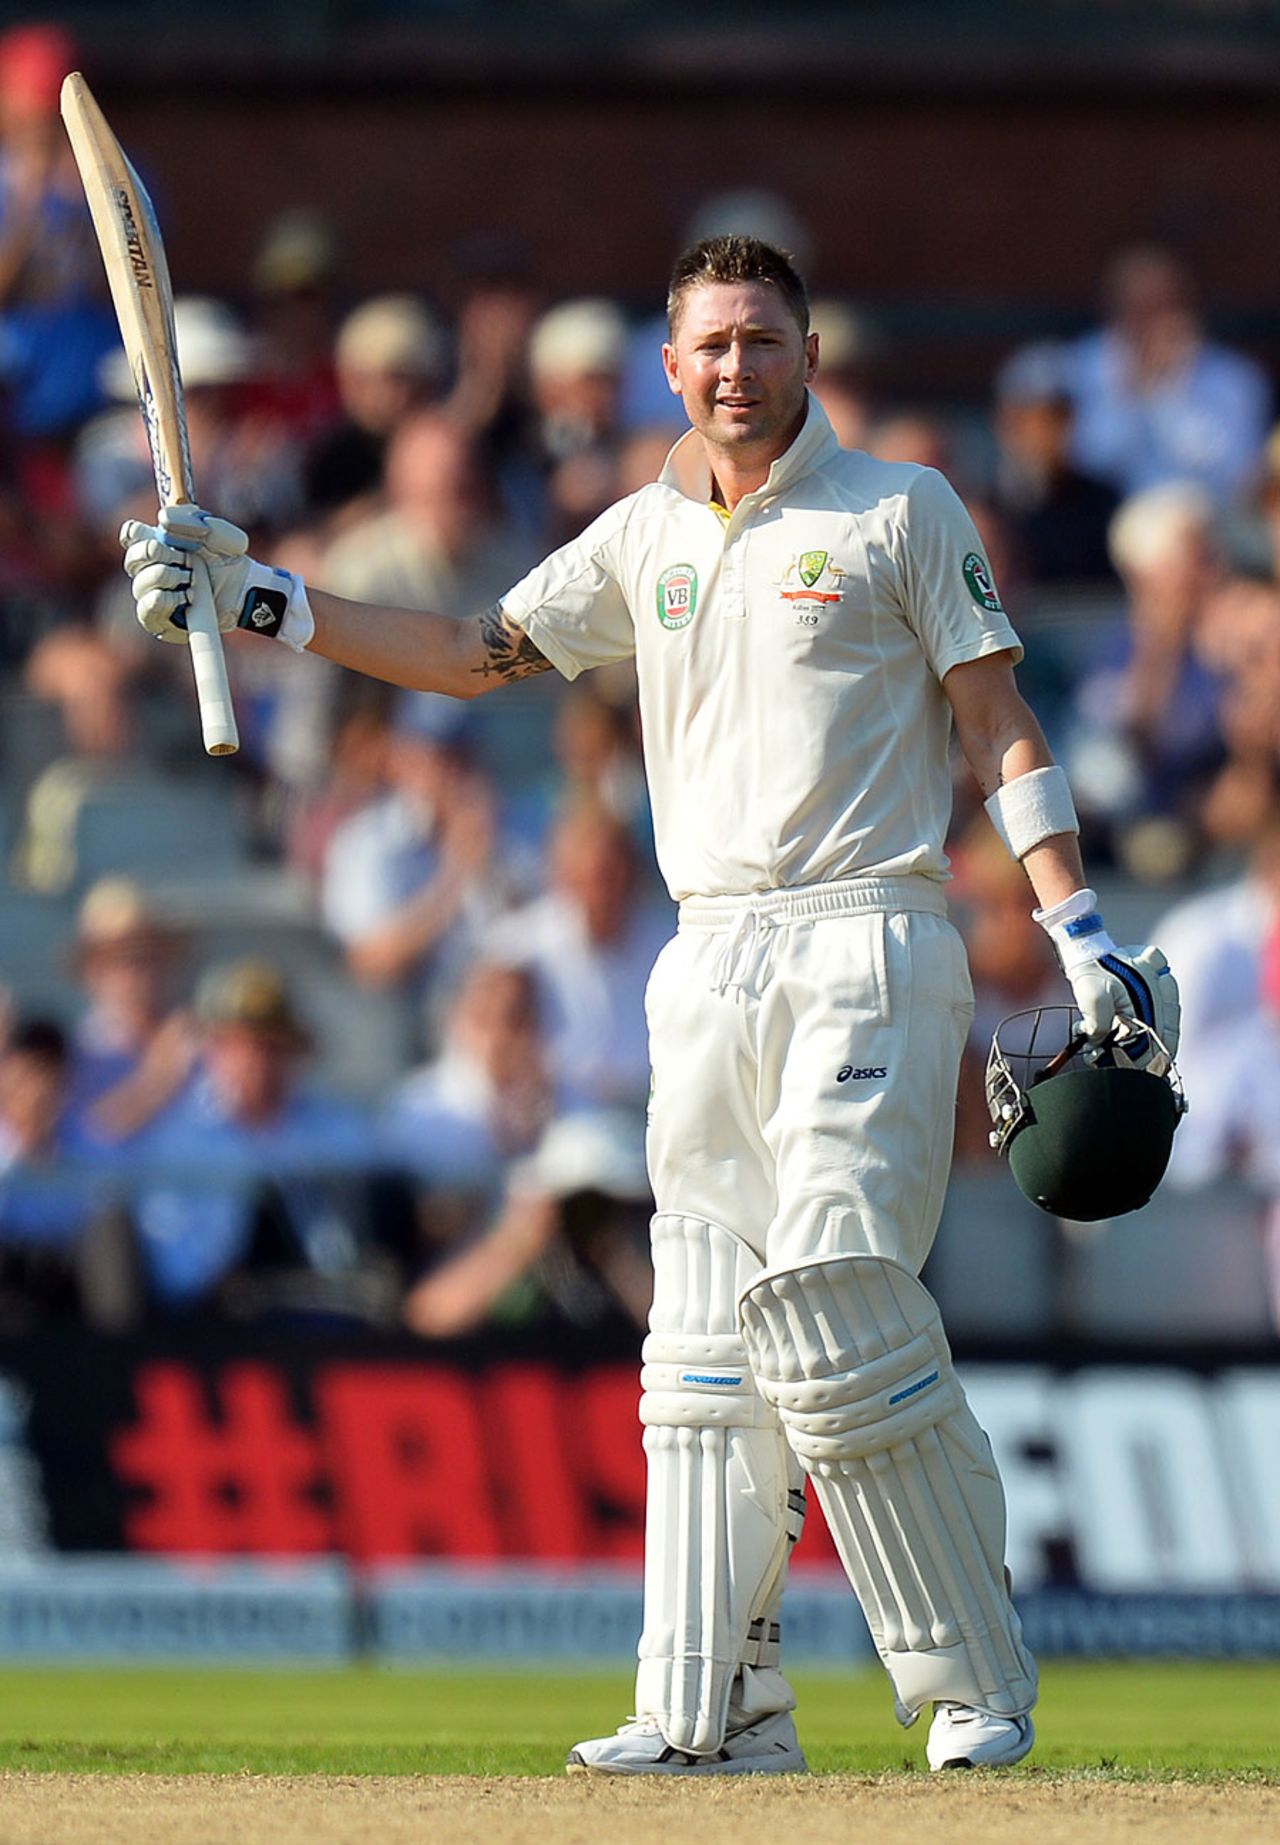 Michael Clarke takes in the ovation for his hundred, England v Australia, 3rd Investec Test, Old Trafford, 1st day, August 1, 2013